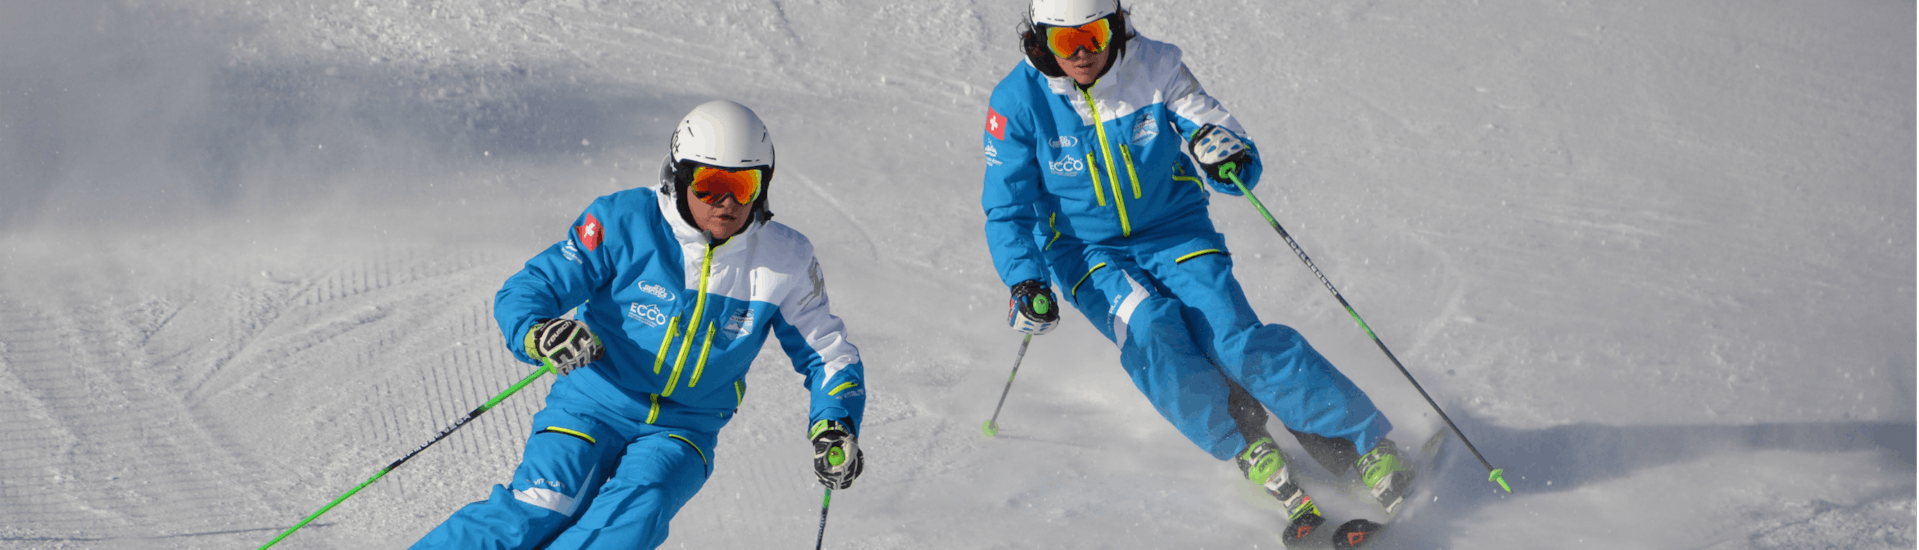 Two skiers ski down the slope during the private kids ski lessons with the Silvaplana Top Snowsports ski school.